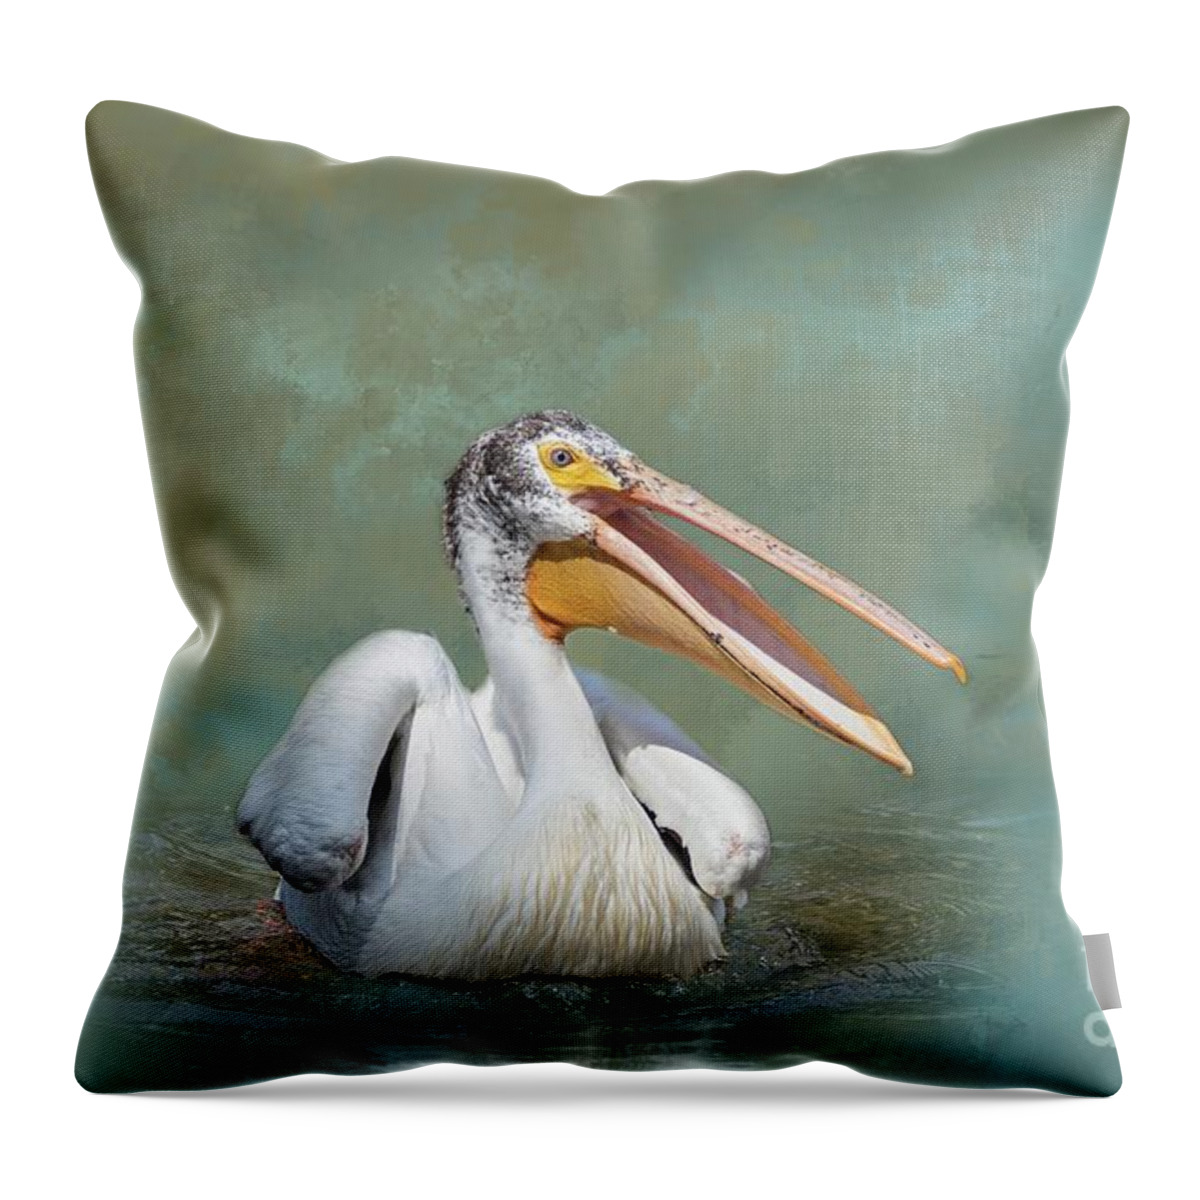 American White Pelican Throw Pillow featuring the photograph American White Pelican by Eva Lechner